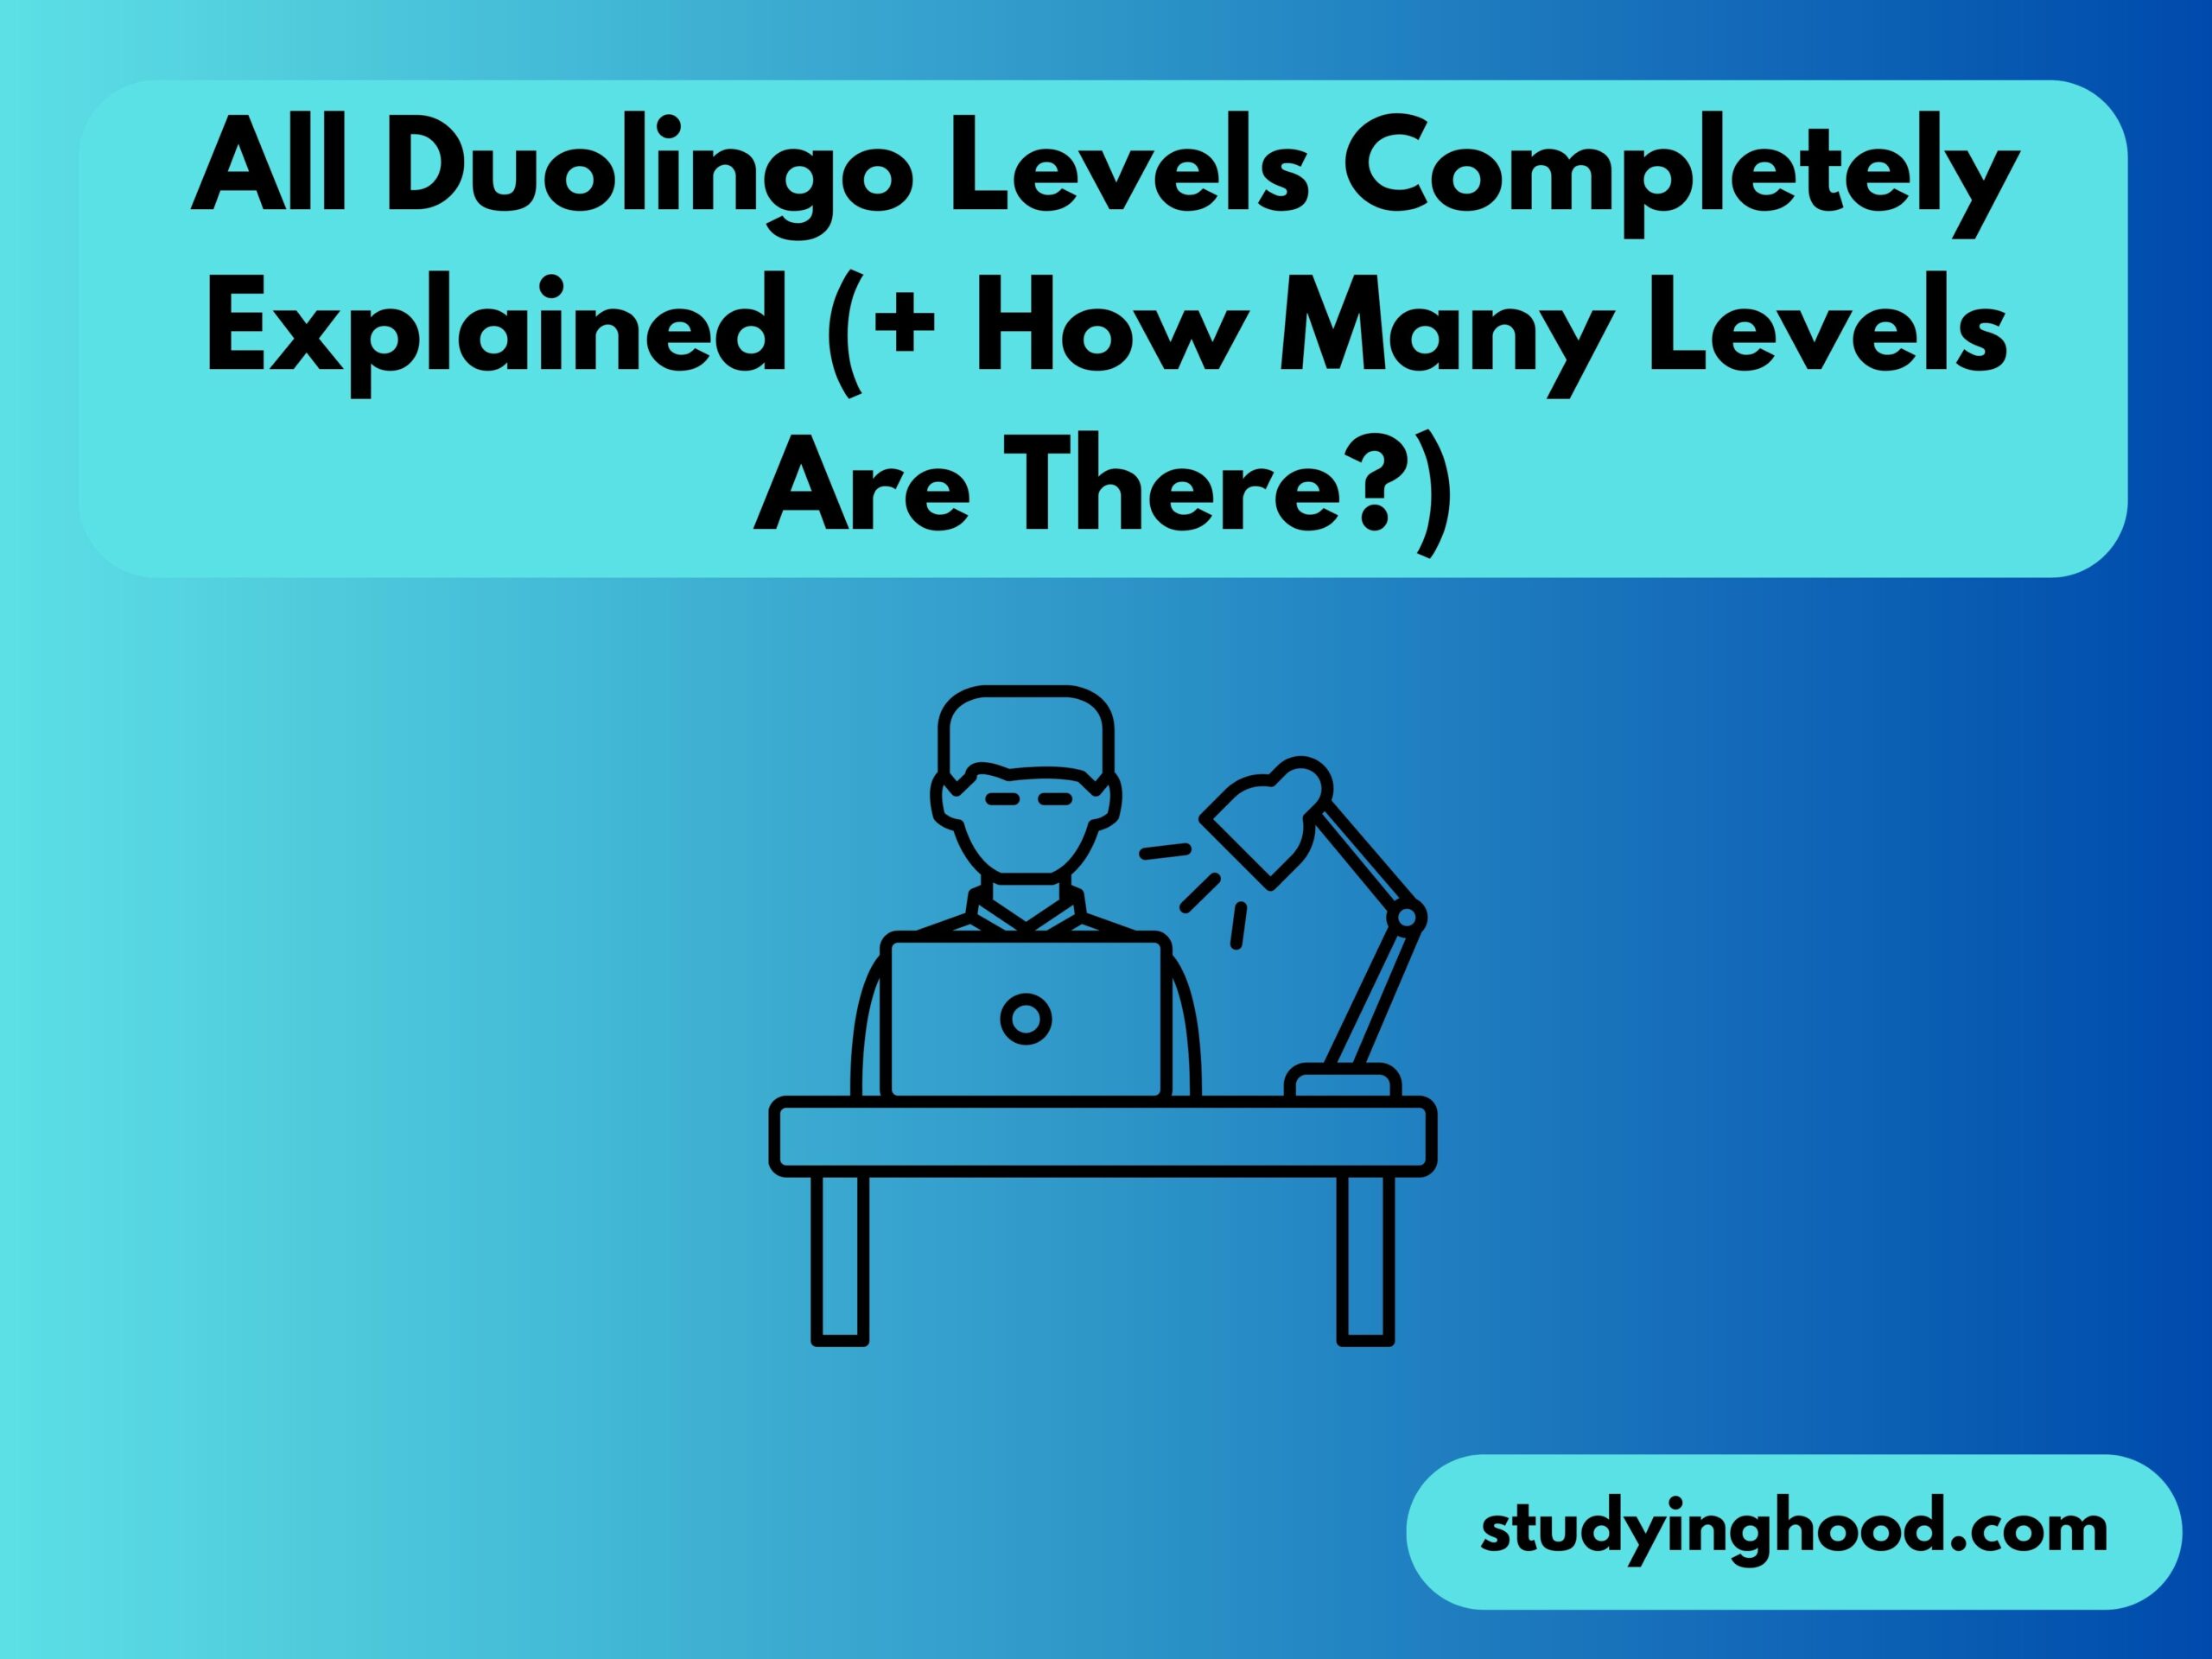 All Duolingo Levels Completely Explained (+ How Many Levels Are There?)